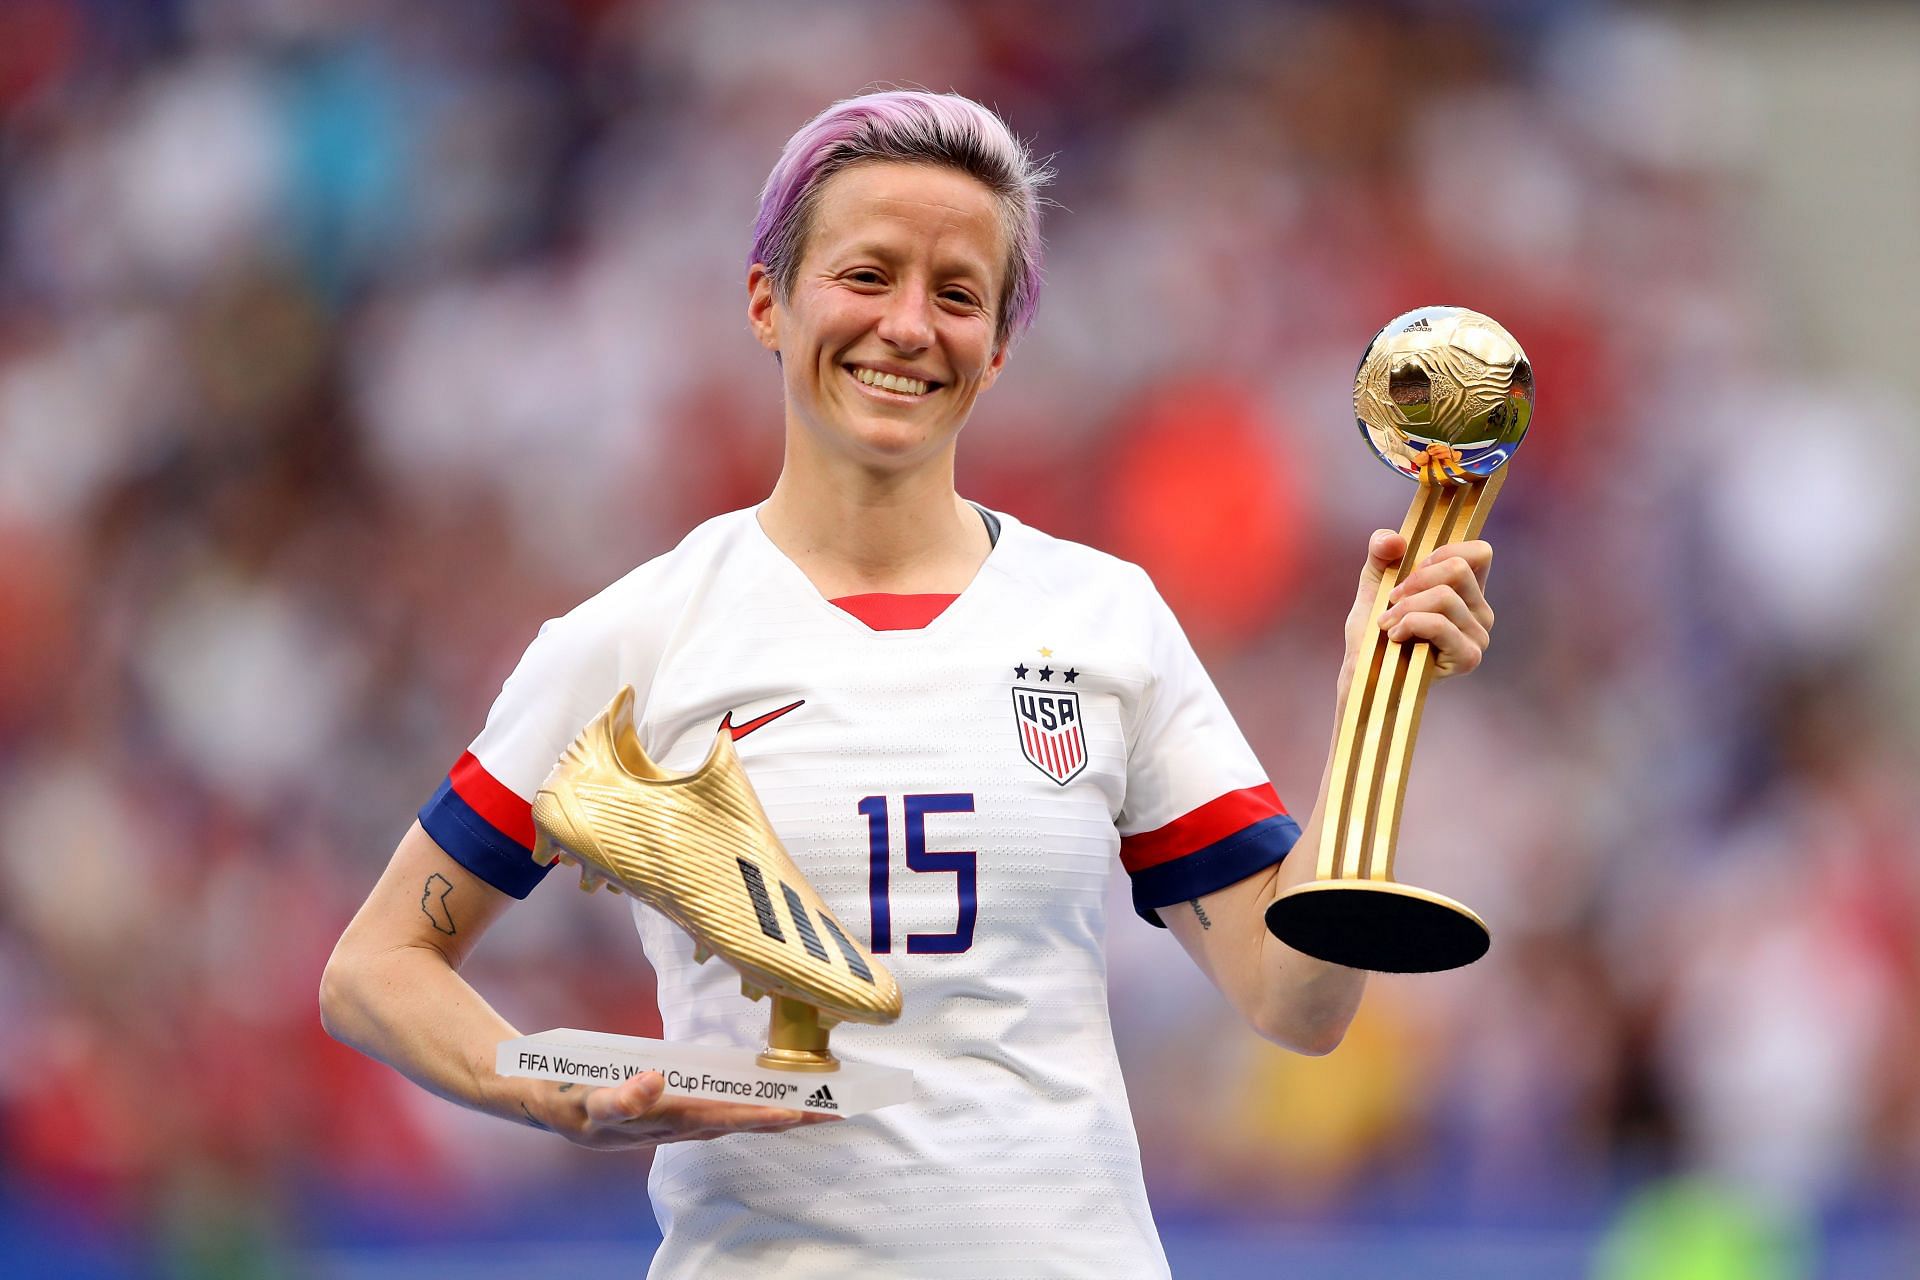 Rapinoe is synonymous with the females game